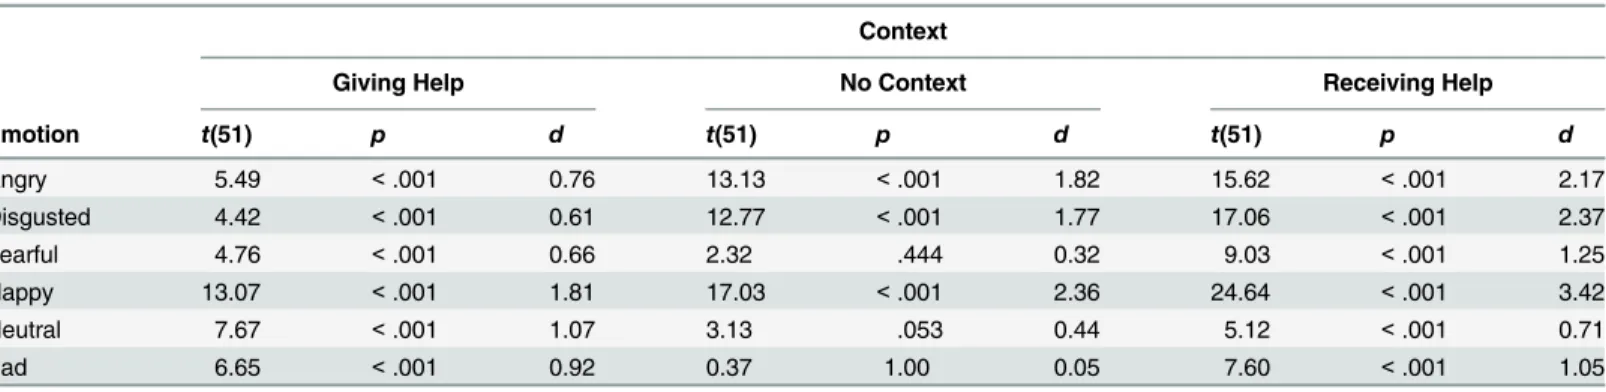 Table 2. Inferential statistics for one-sample t-tests comparing approachability ratings in each context to the neutral value of zero, separately for each emotion.